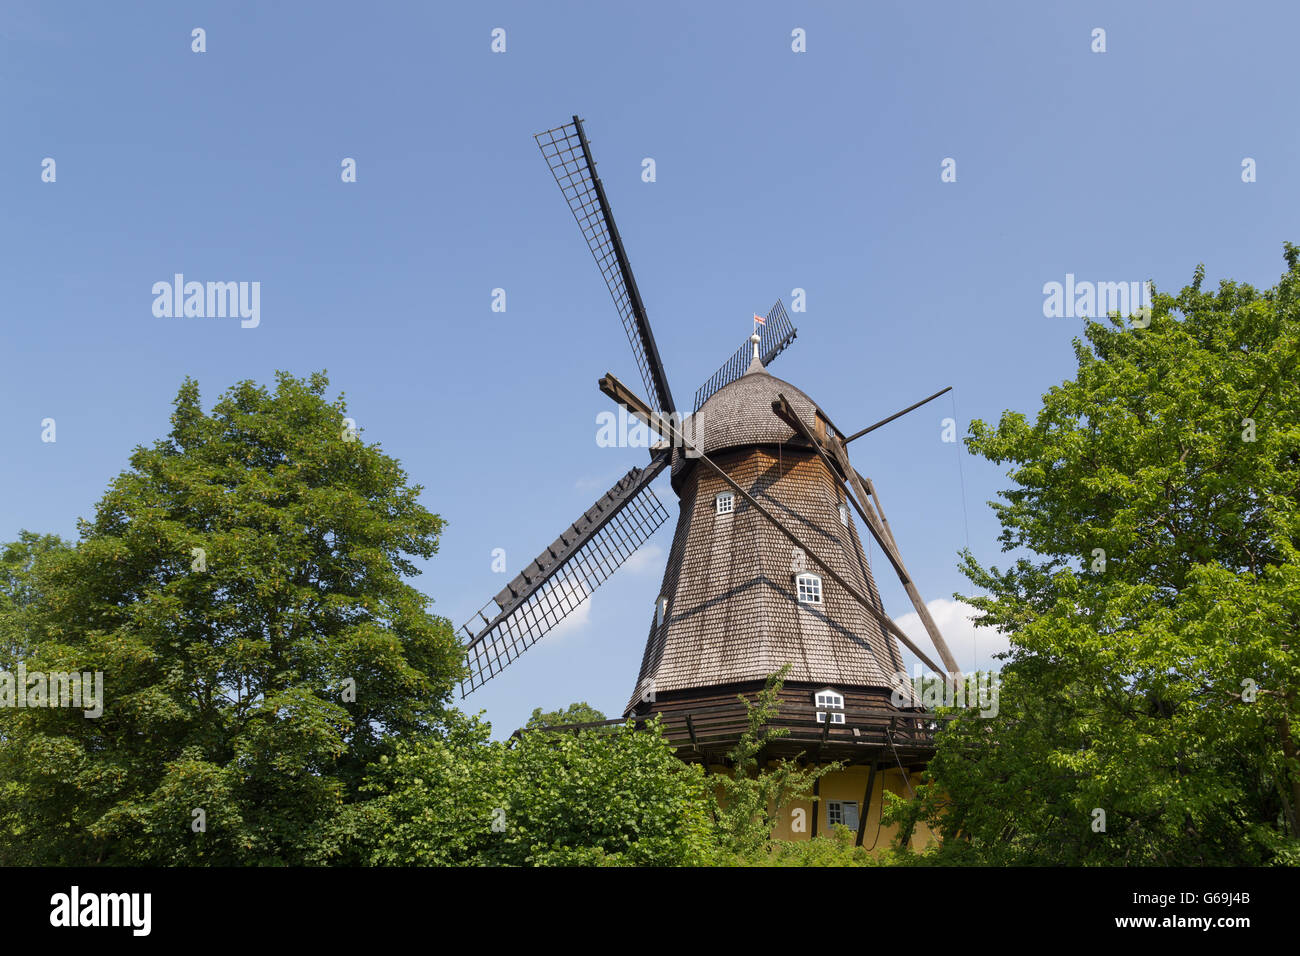 Lyngby, Denmark - June 23, 2016: The historic Fuglevad windmill in the Frilands Museum. Stock Photo